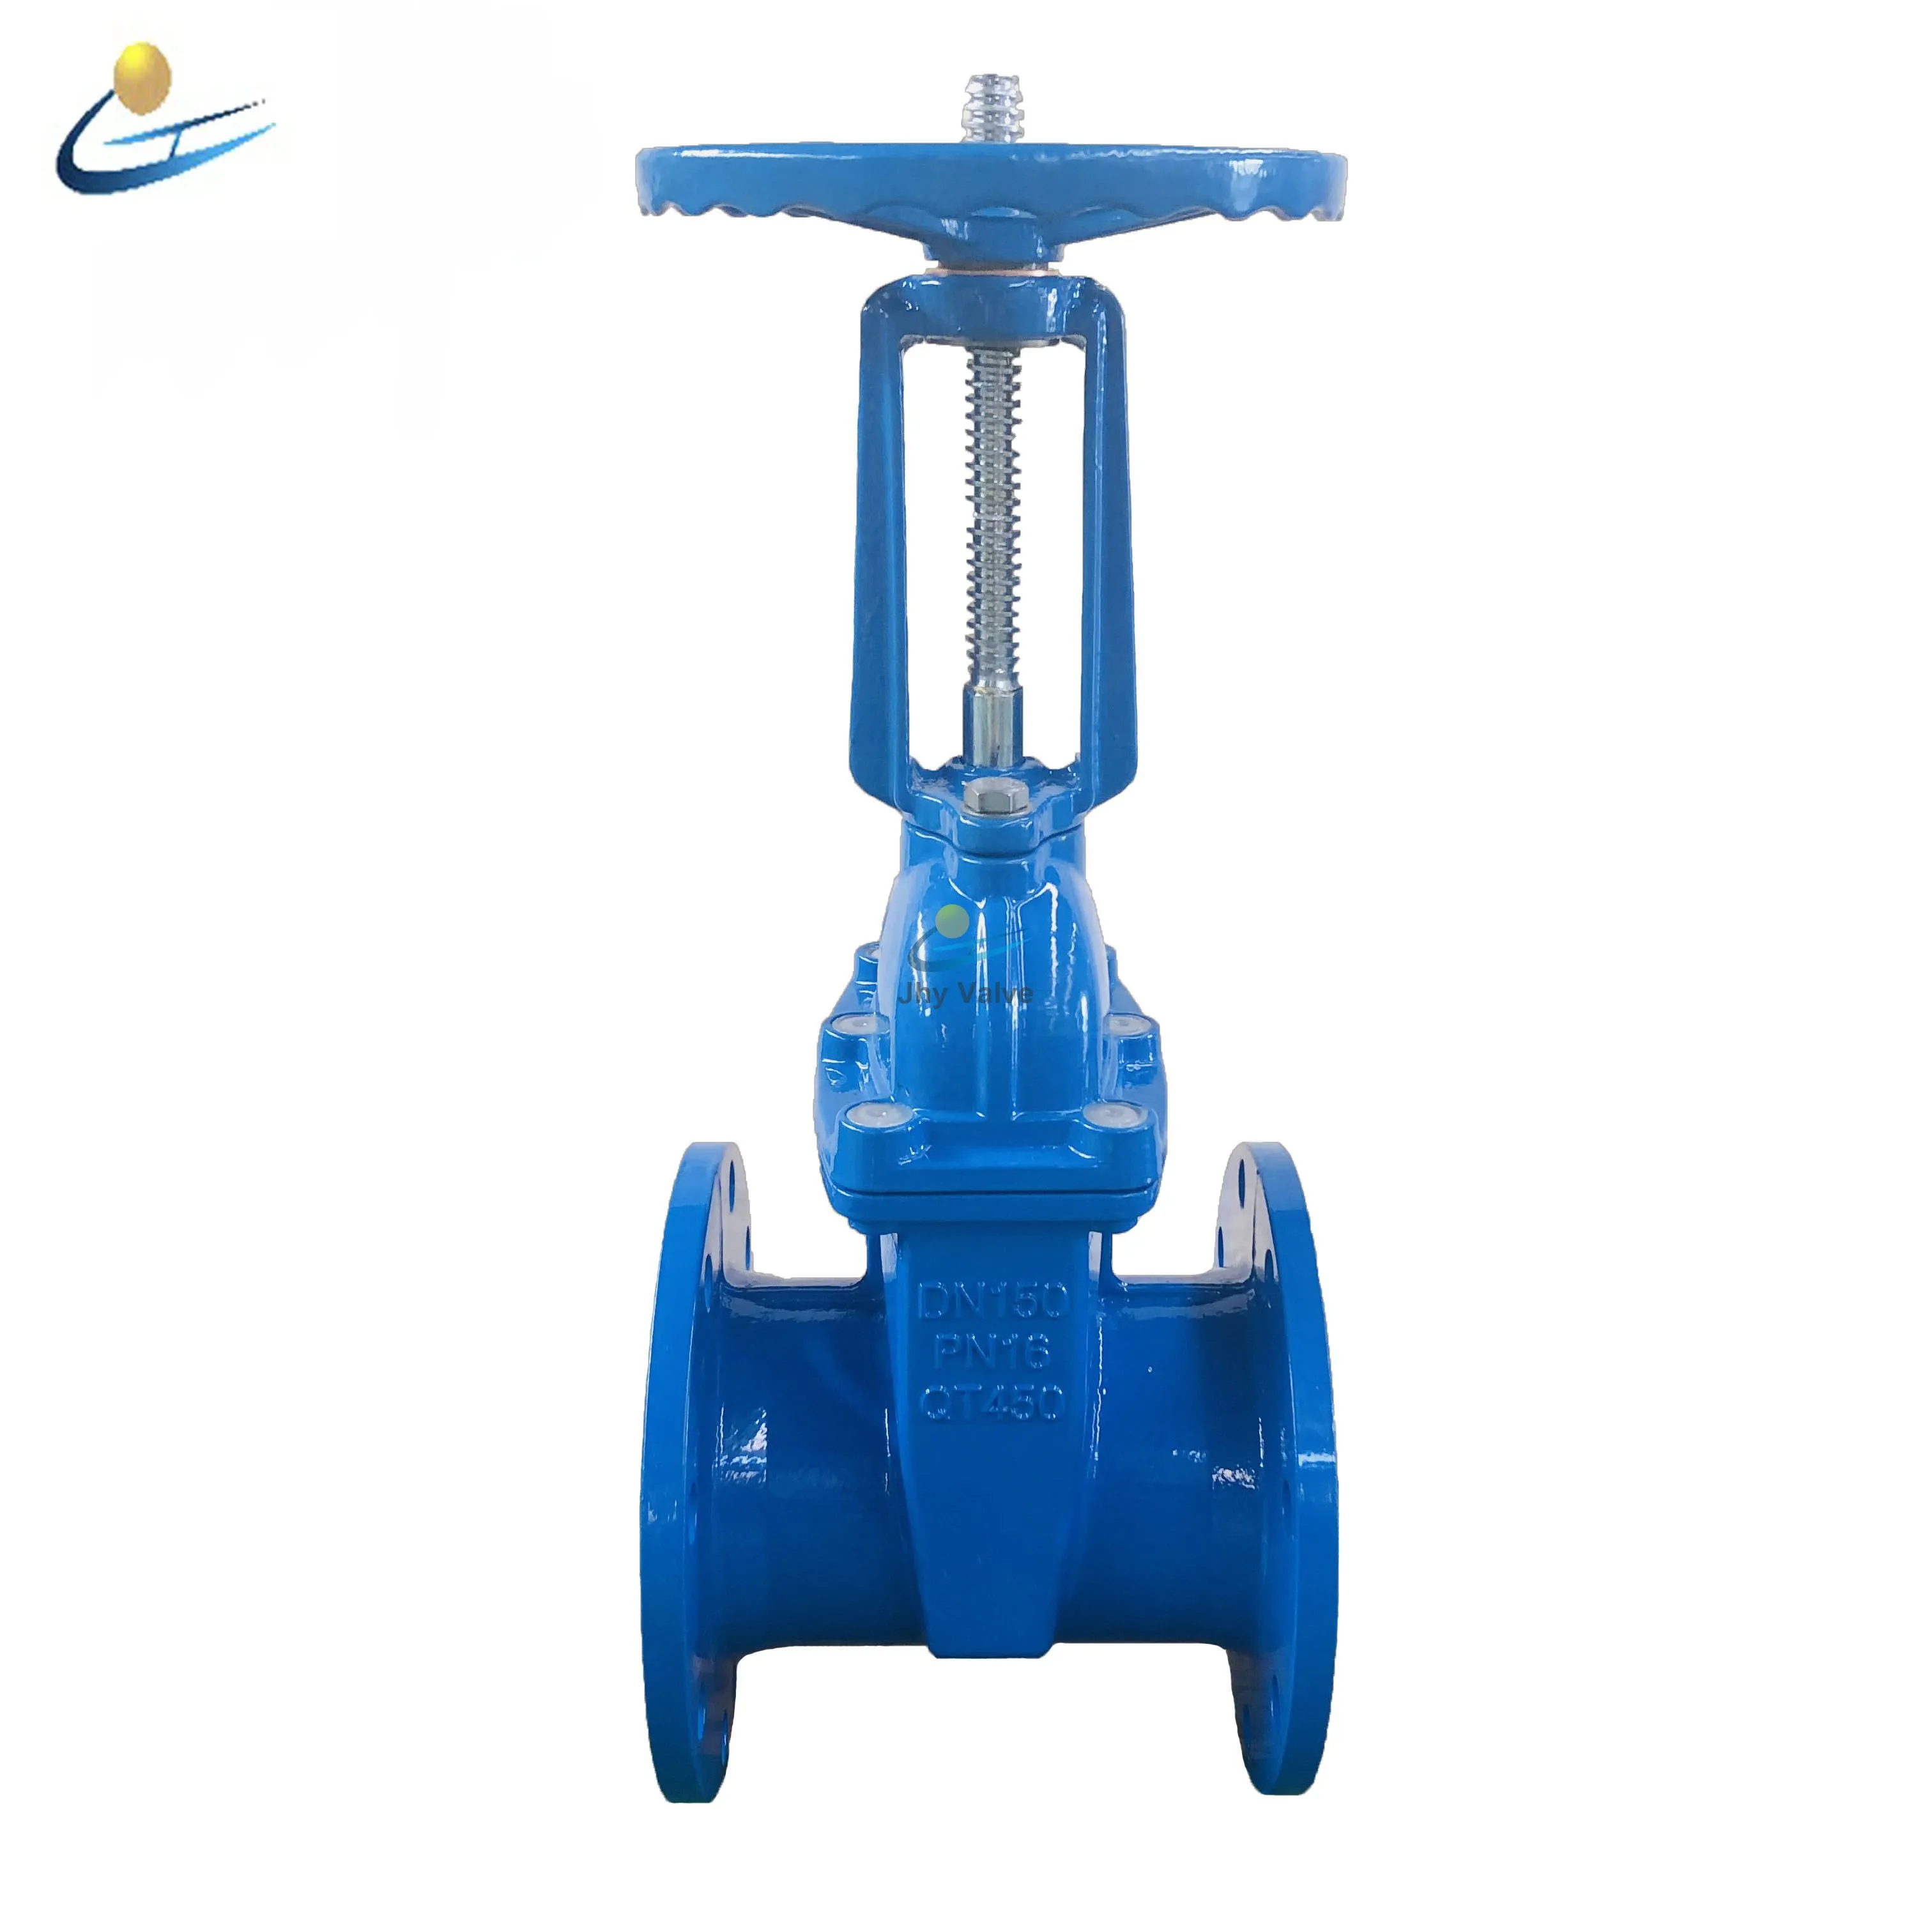 Ductile Iron Resilient Seat OS&Y Gate Valve